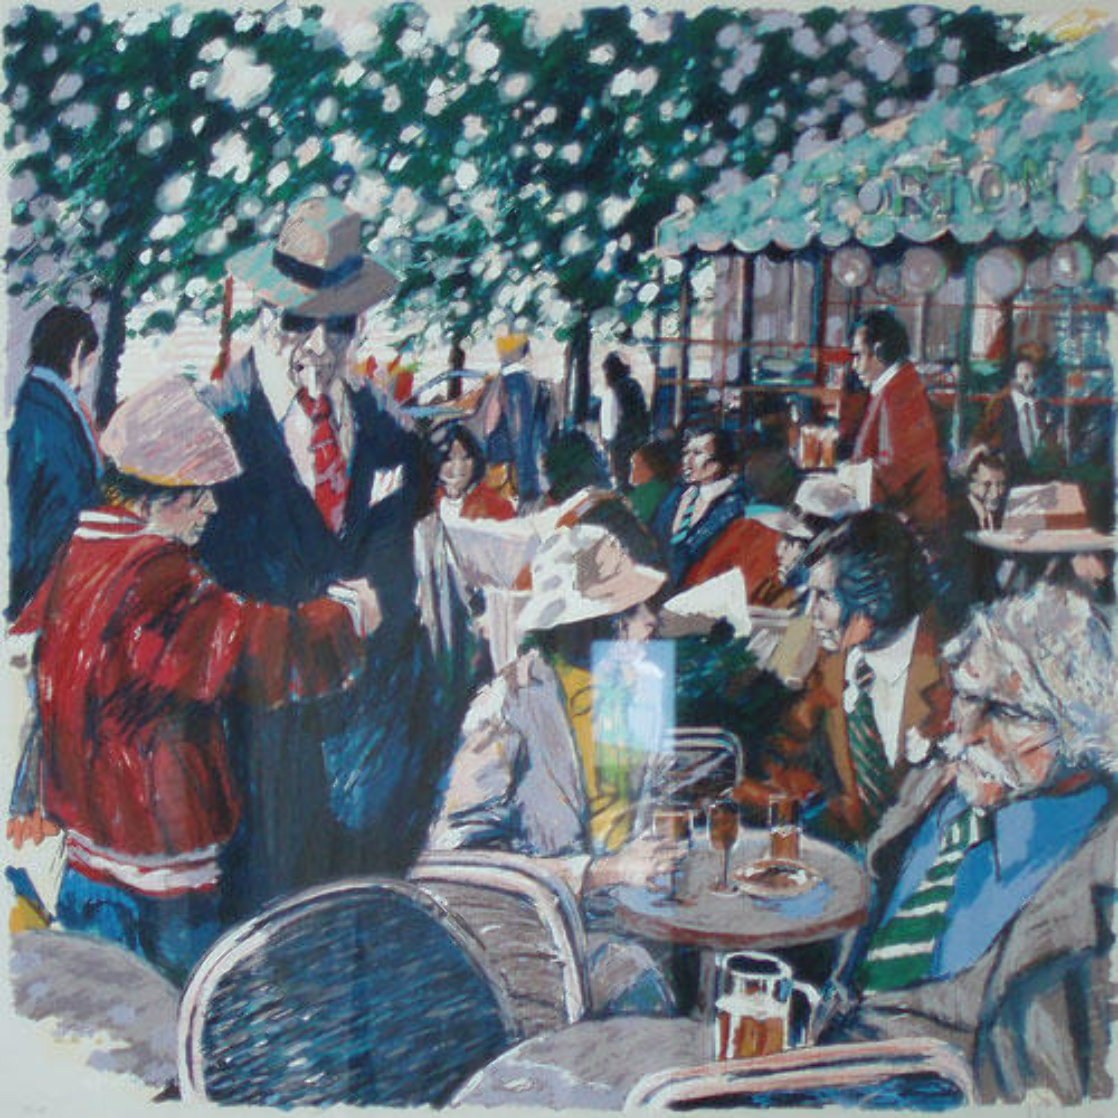 Cafe Tortoni 1981 Limited Edition Print by Aldo Luongo